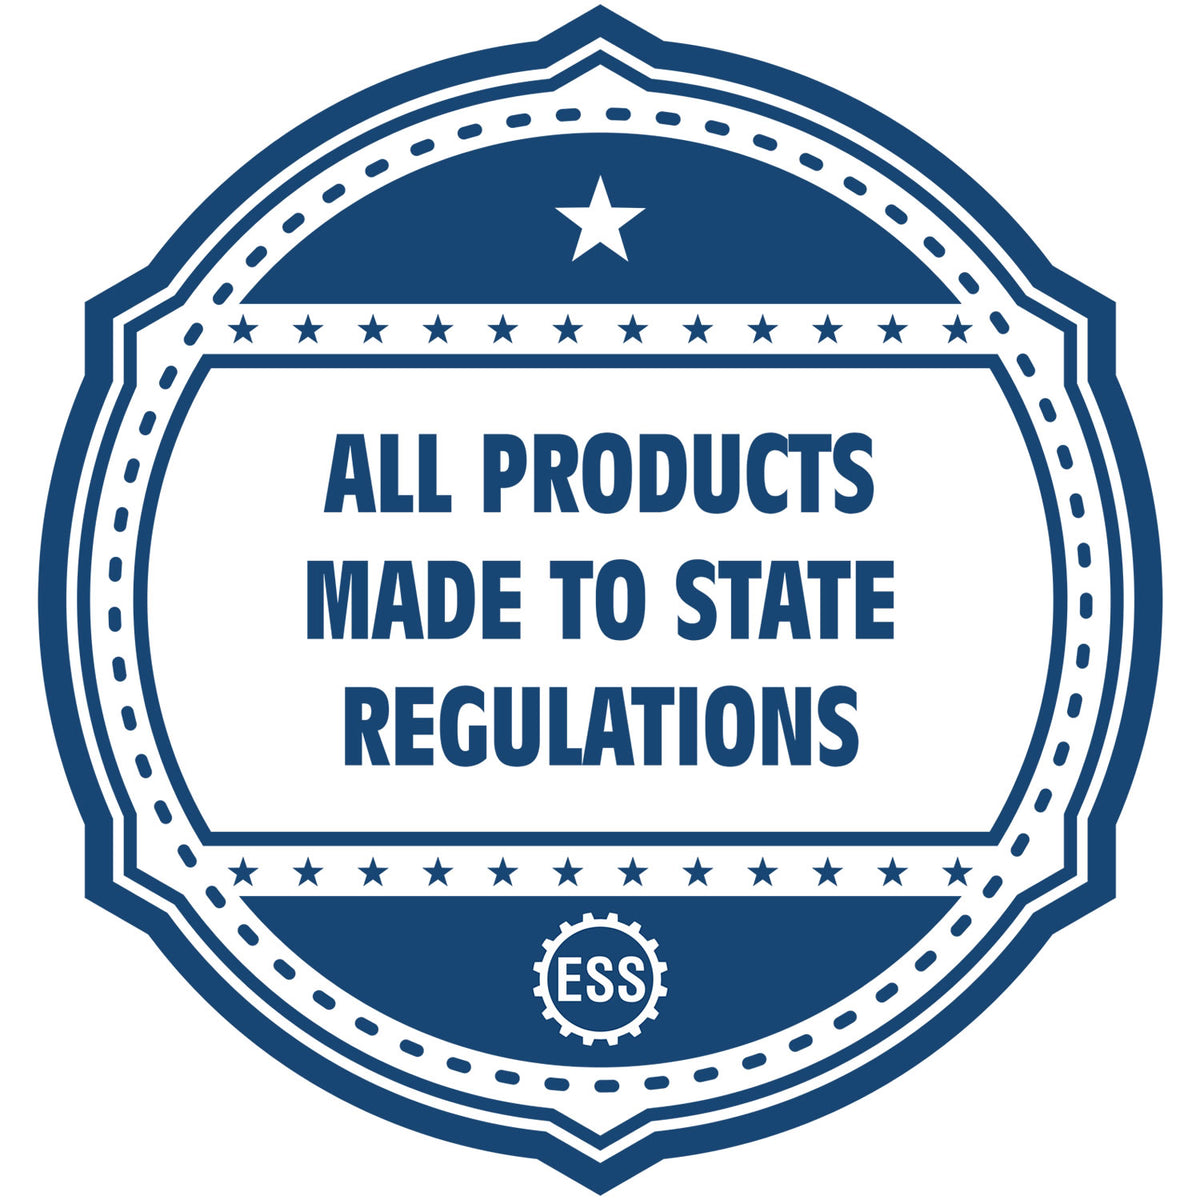 An icon or badge element for the Handheld Washington Architect Seal Embosser showing that this product is made in compliance with state regulations.